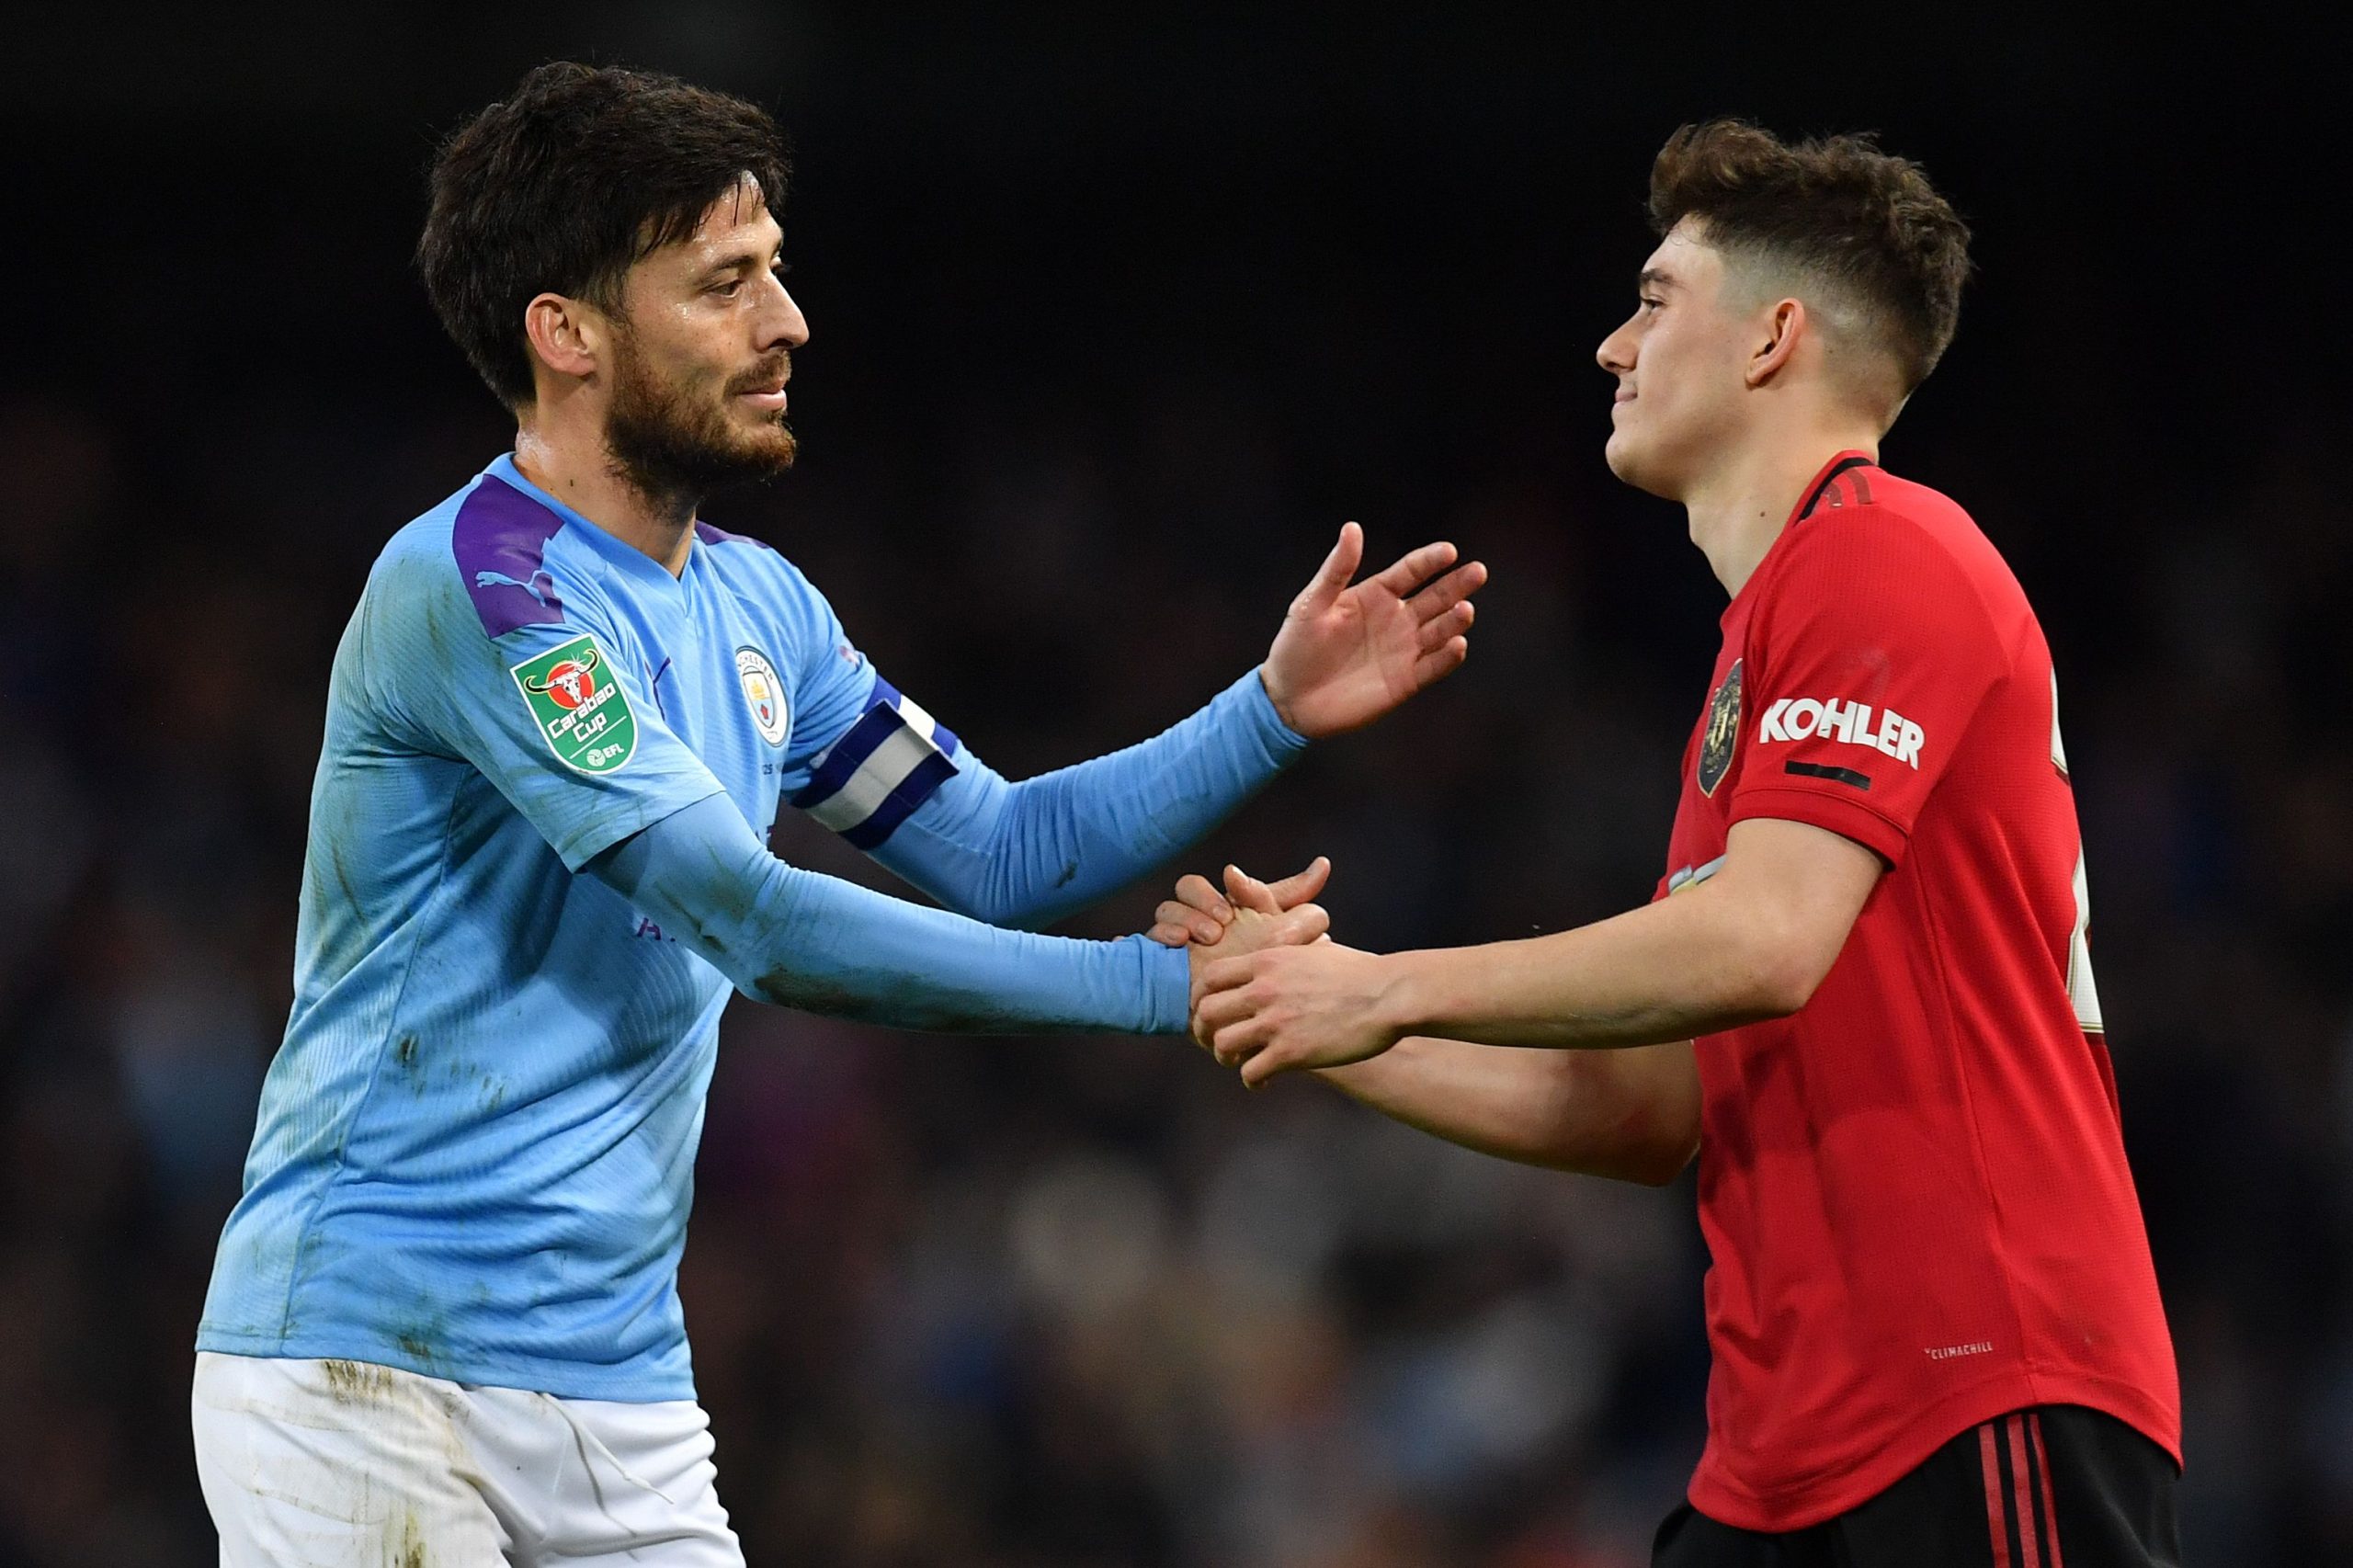 Manchester City presume that the semi-final clash with Manchester City in the Carabao Cup will go ahead as scheduled. (GETTY Images)